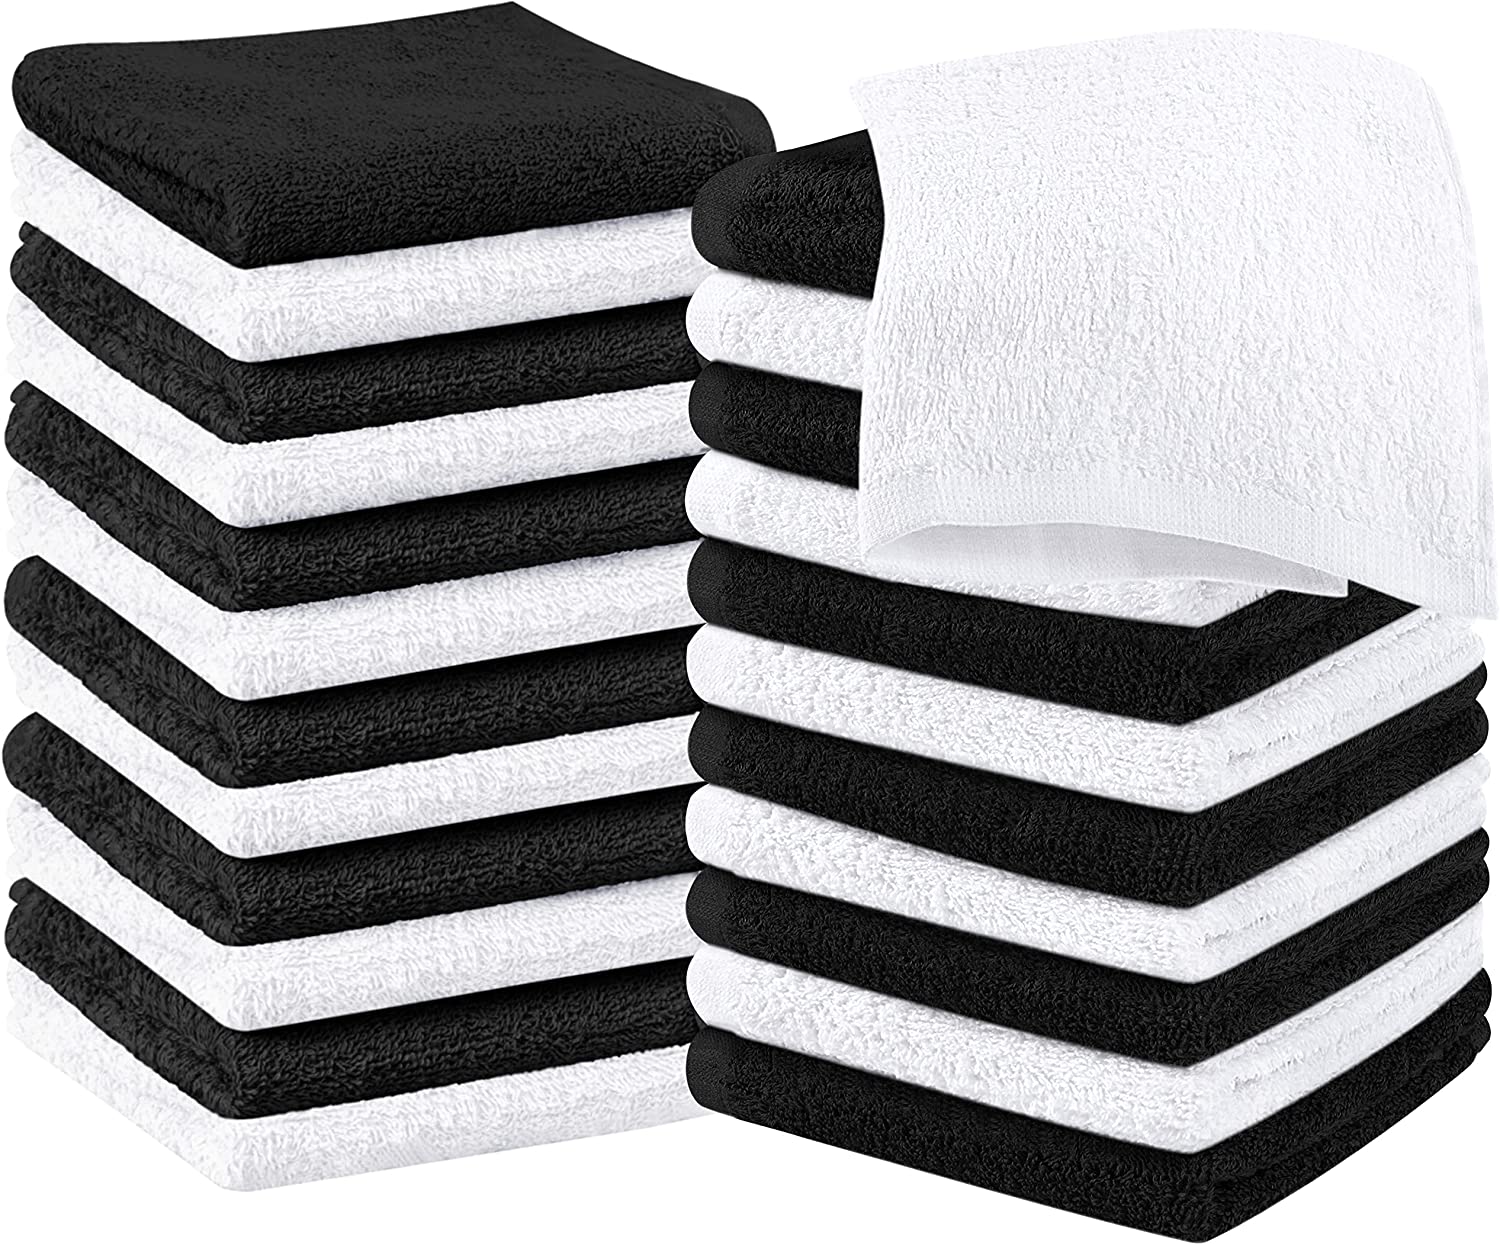 Utopia Towels Cotton Washcloths Set - 100% Ring Spun Cotton, Premium Quality Flannel Face Cloths, Highly Absorbent and Soft Feel Fingertip Towels